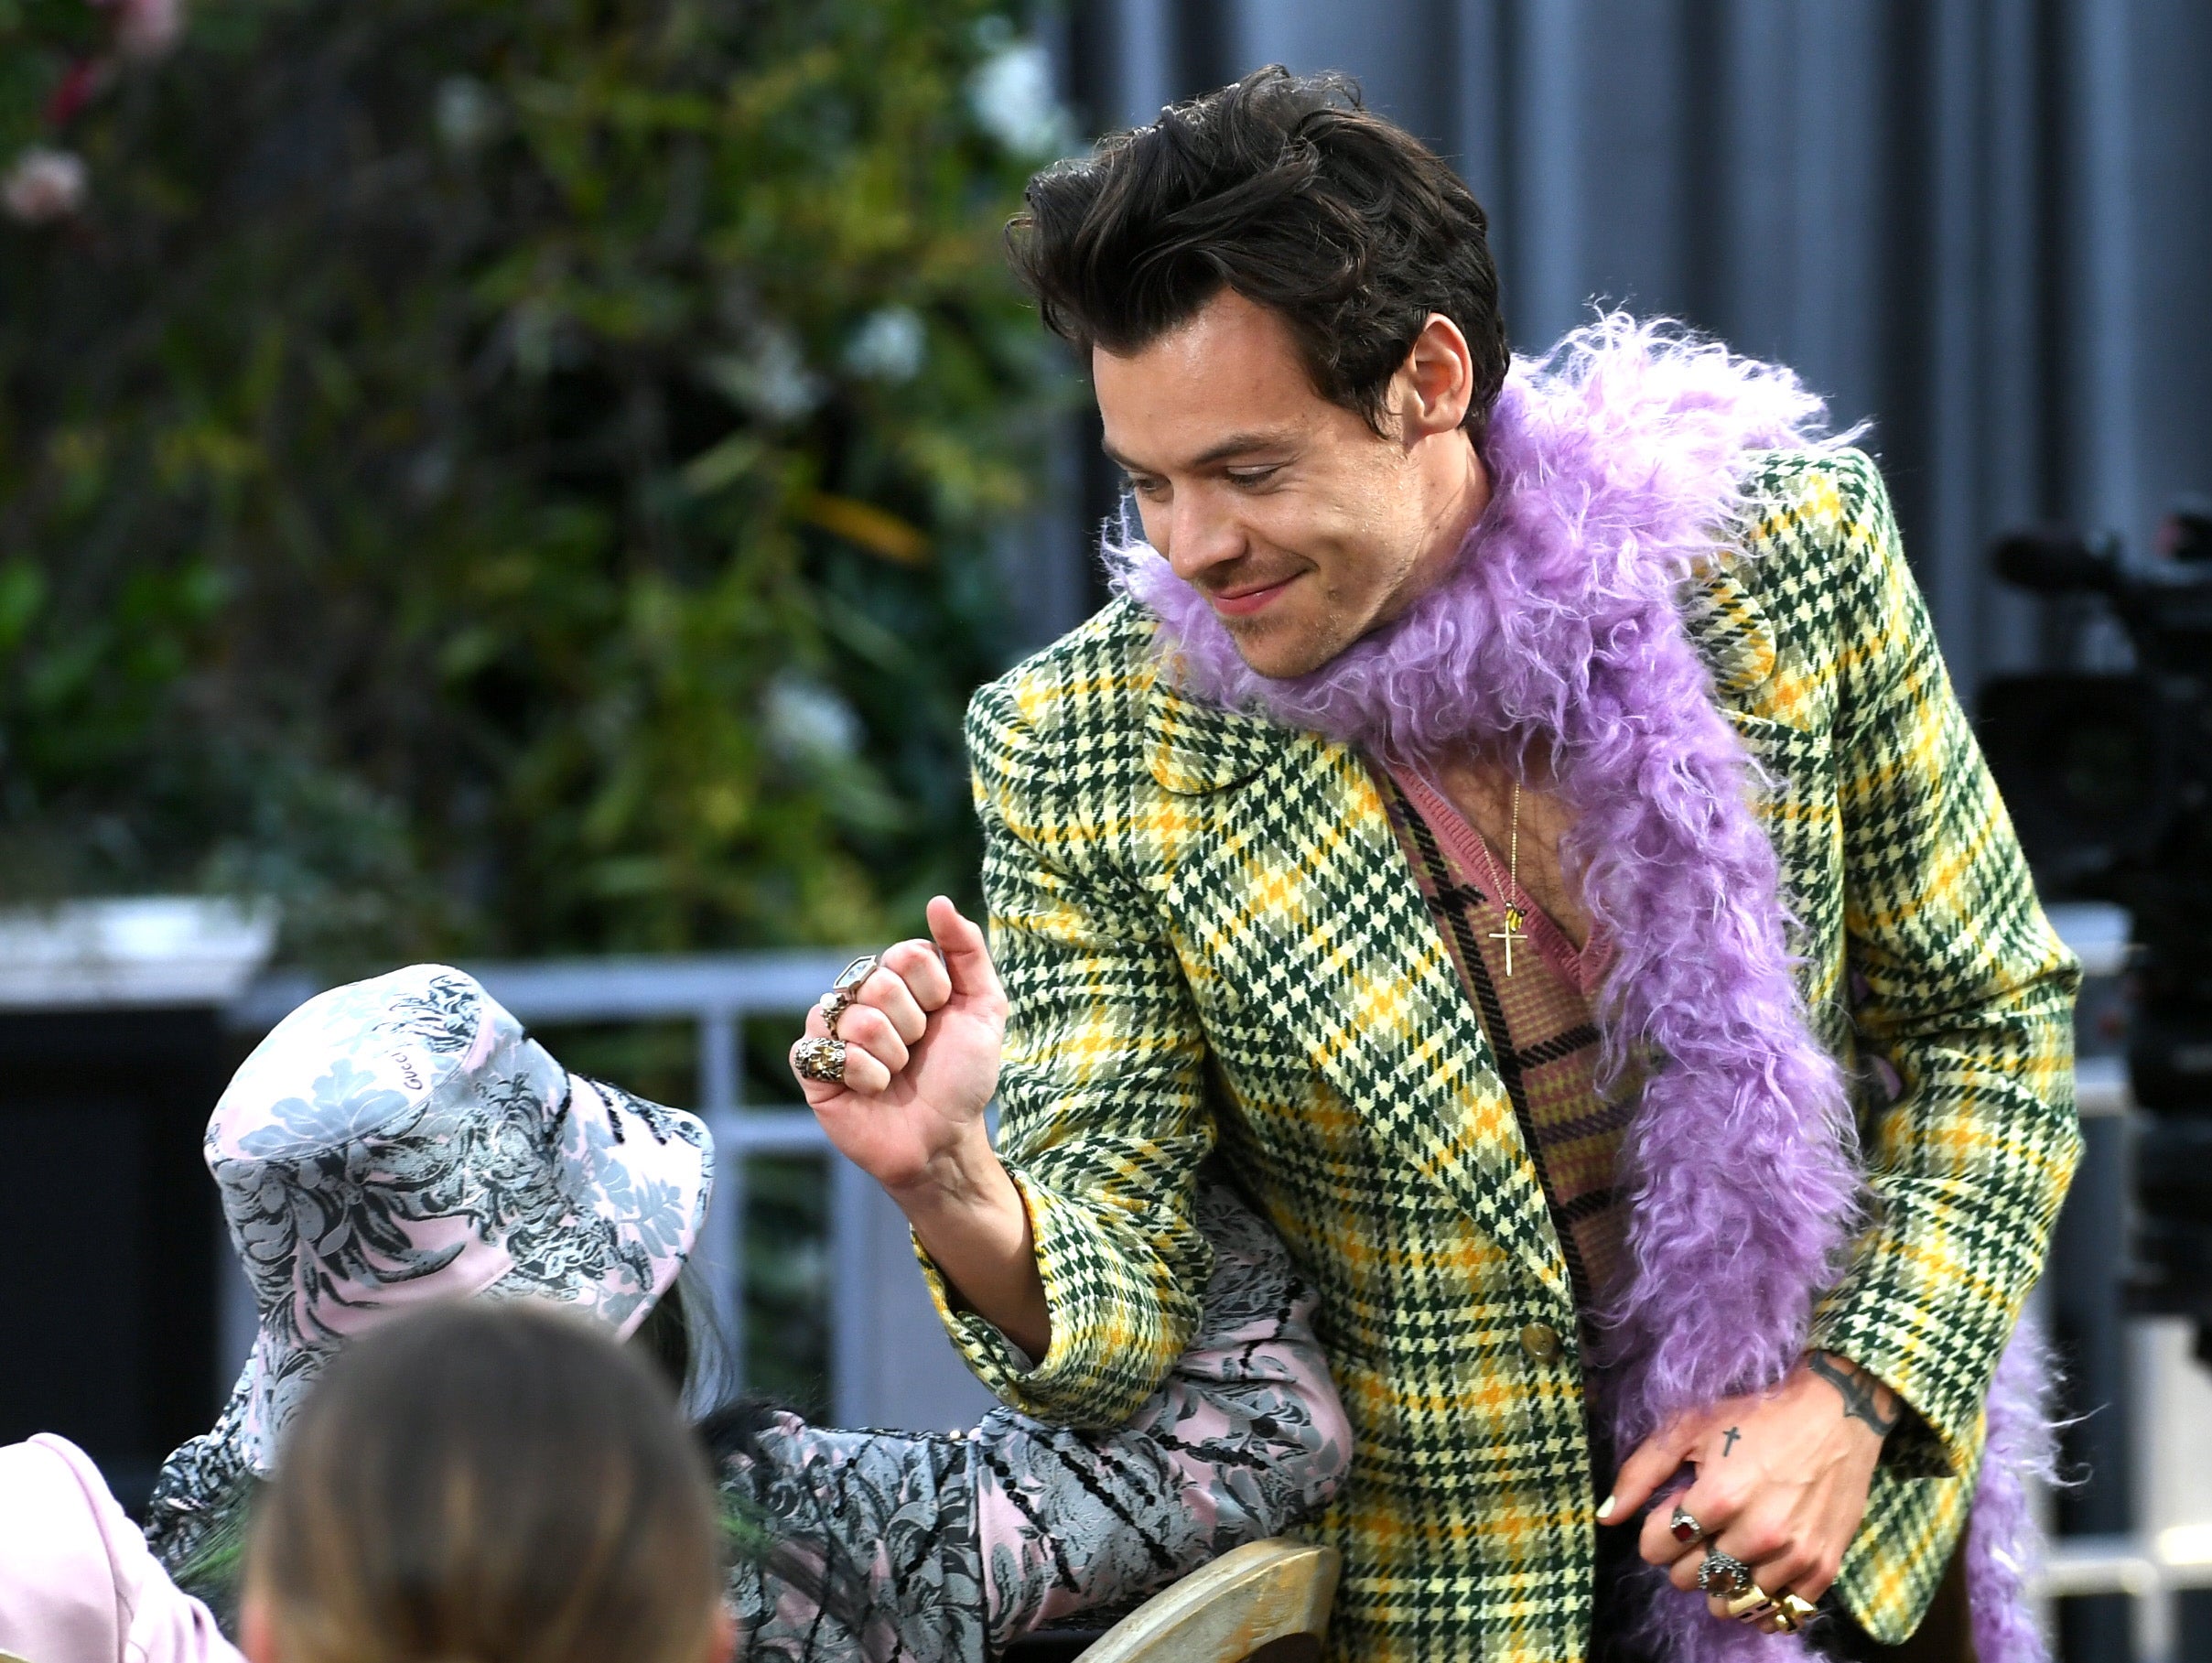 Harry Styles greets Billie Eilish at the 2021 Grammys